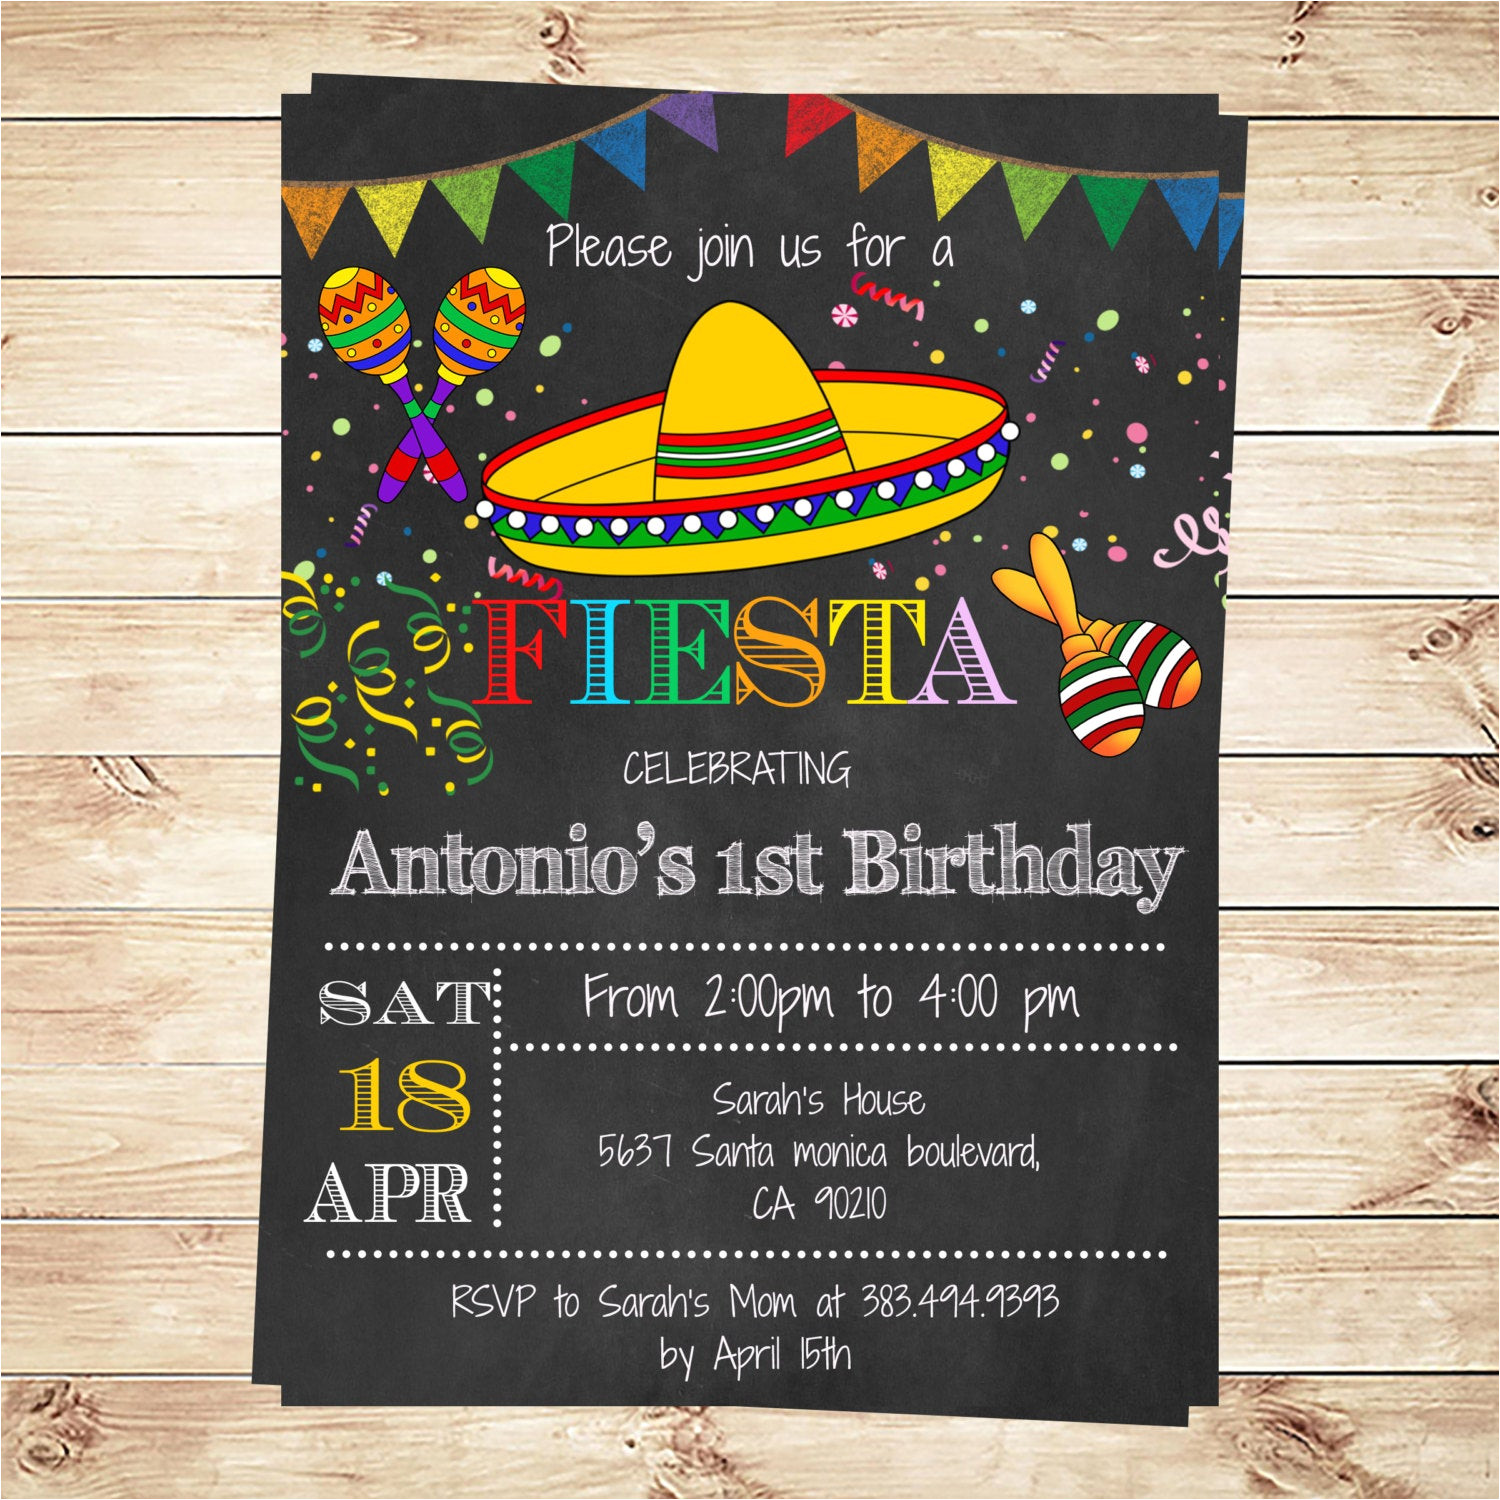 Mexican Party Invitation Template Birthday Mexican Fiesta Party Invitations Printable